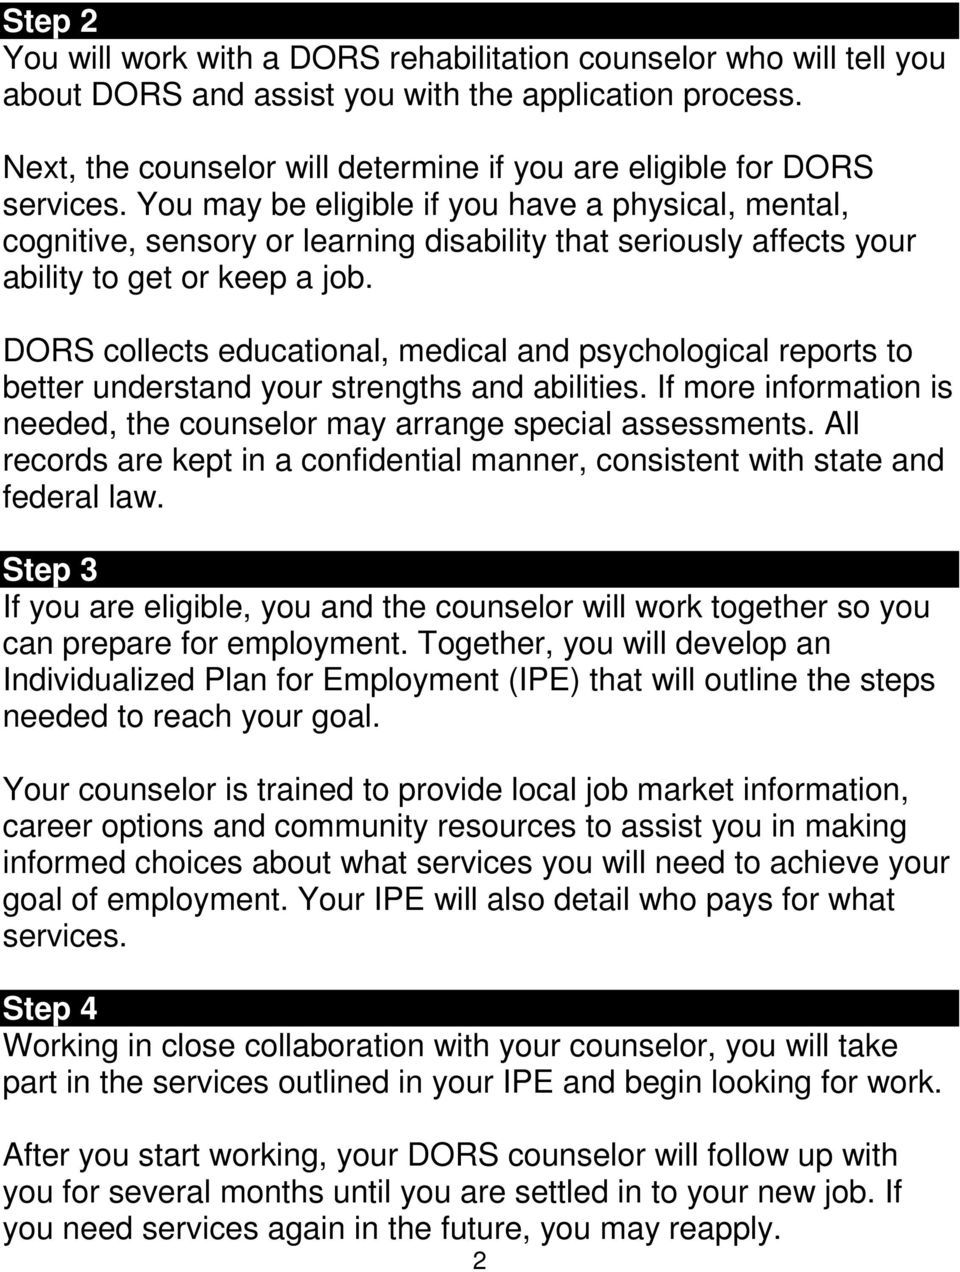 You may be eligible if you have a physical, mental, cognitive, sensory or learning disability that seriously affects your ability to get or keep a job.